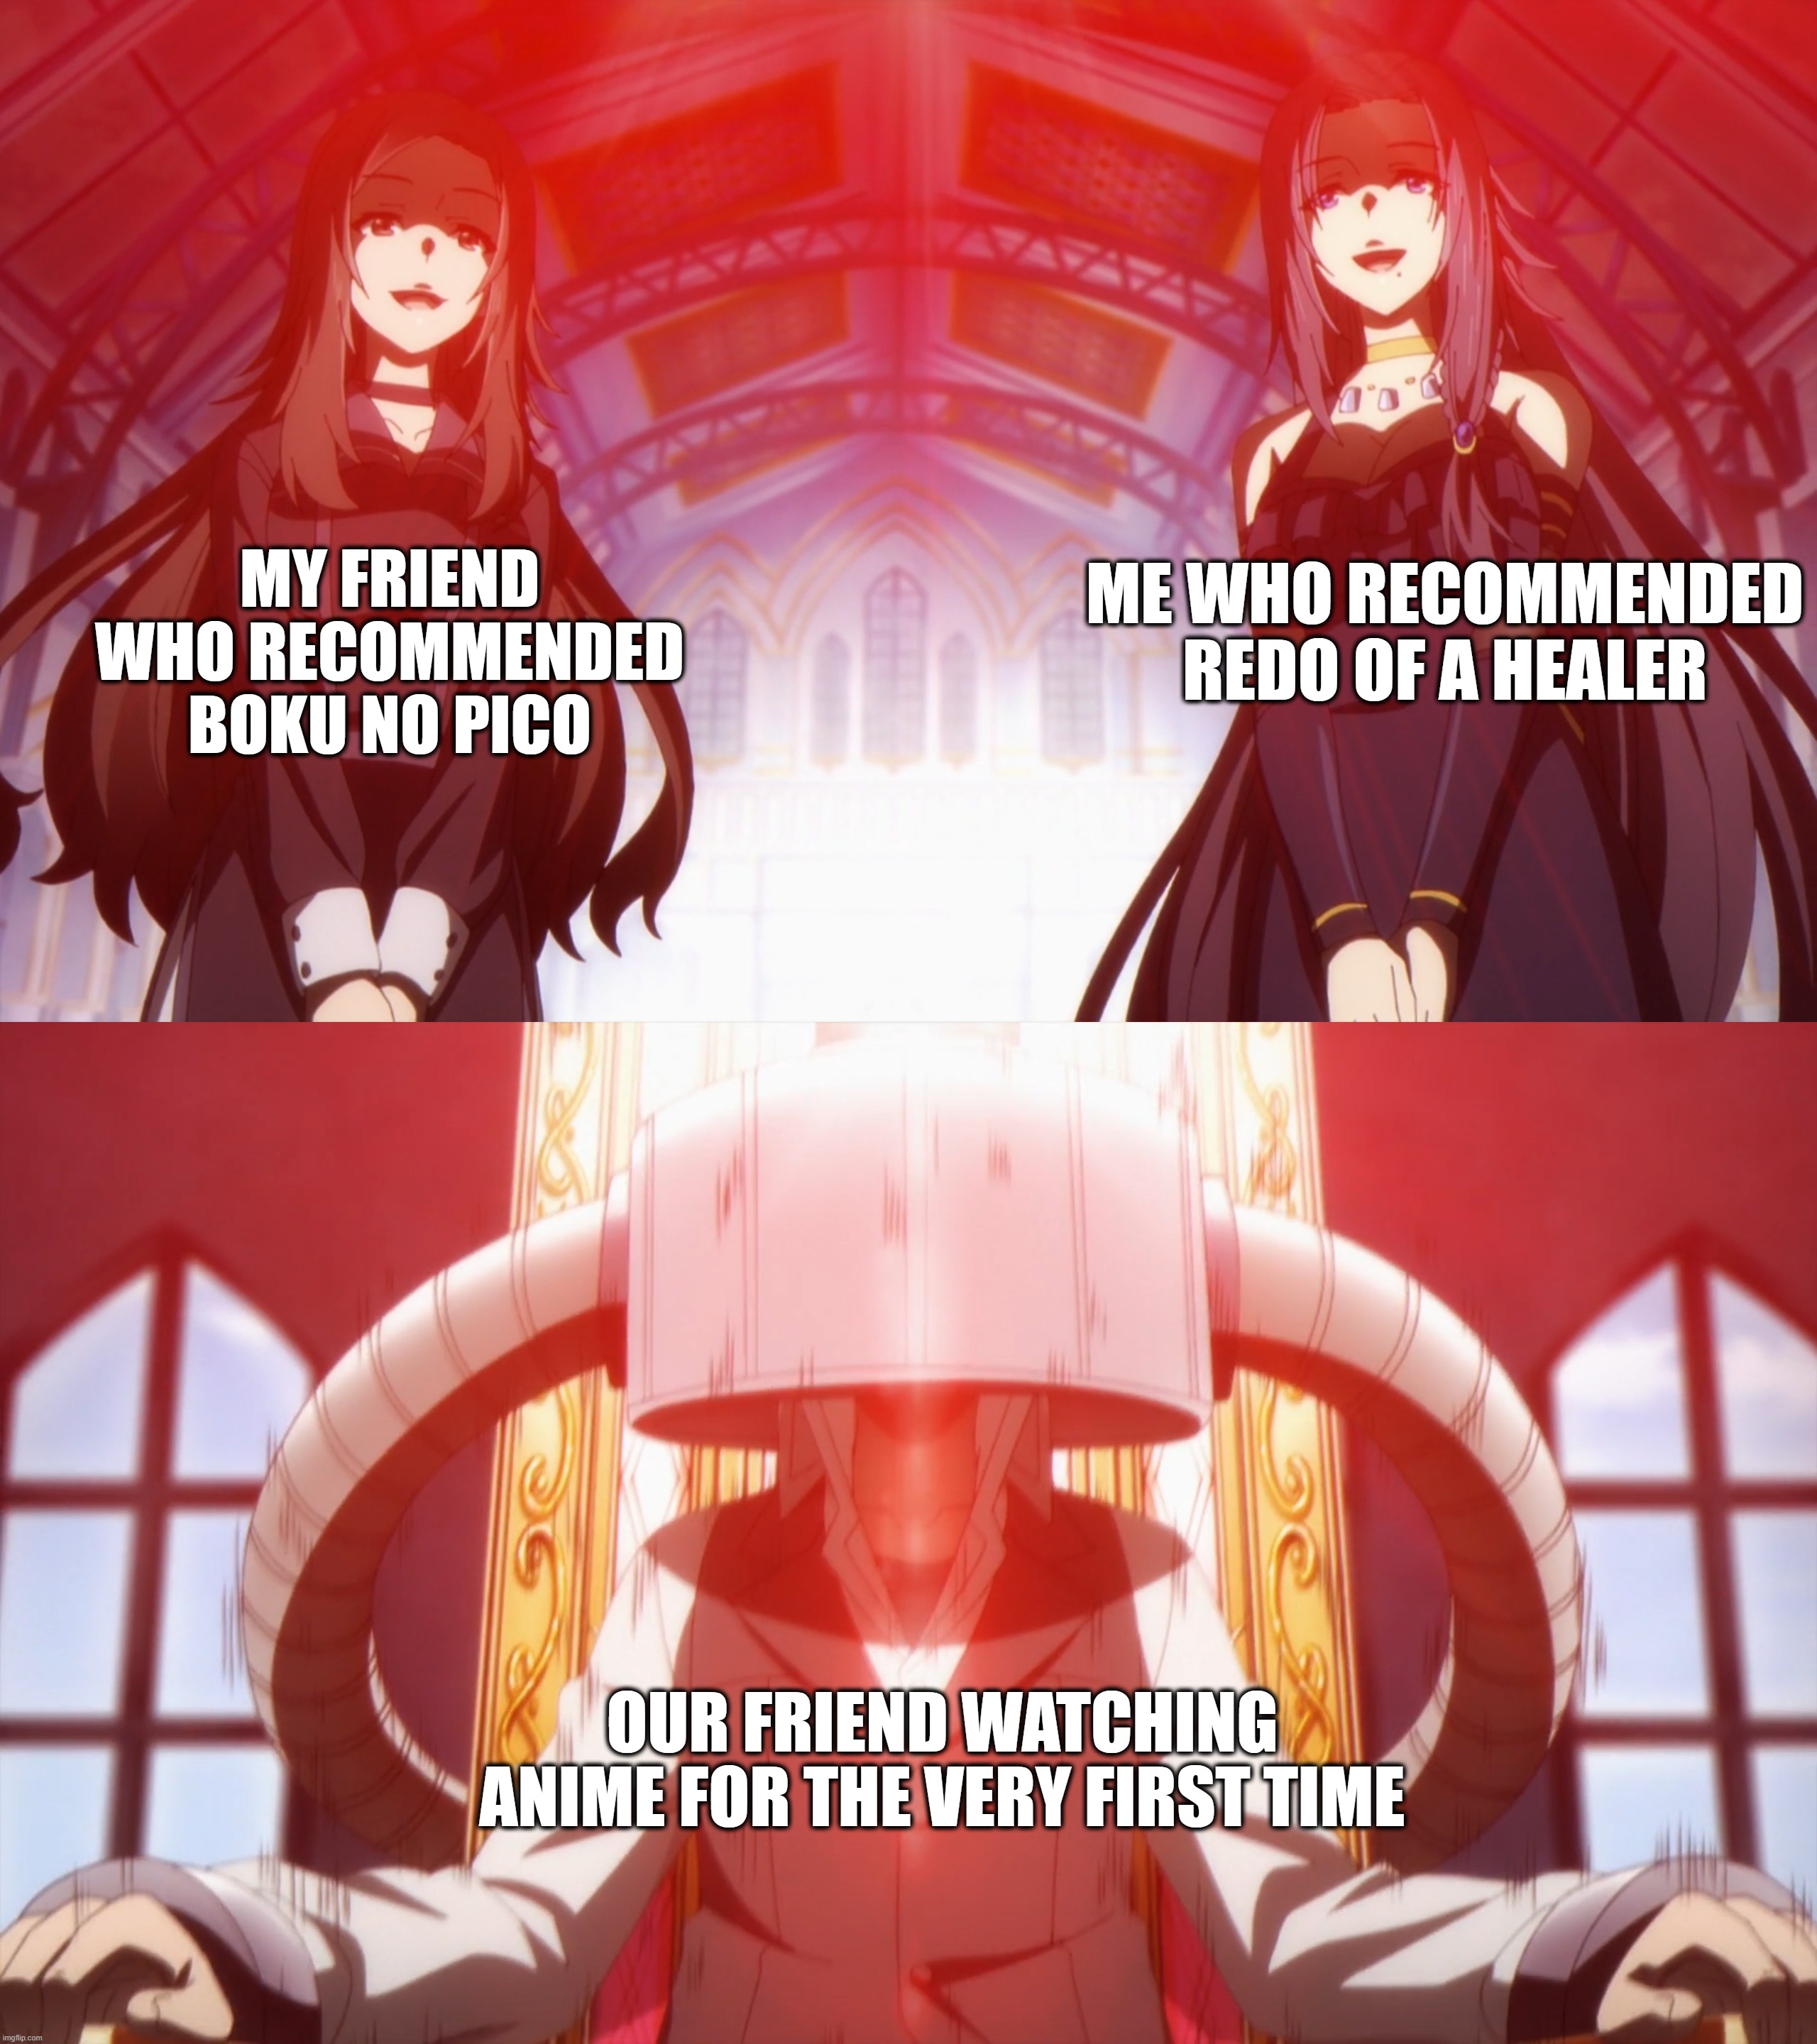 The tradition carries on | MY FRIEND WHO RECOMMENDED
BOKU NO PICO; ME WHO RECOMMENDED REDO OF A HEALER; OUR FRIEND WATCHING ANIME FOR THE VERY FIRST TIME | image tagged in anime,meme,evil | made w/ Imgflip meme maker